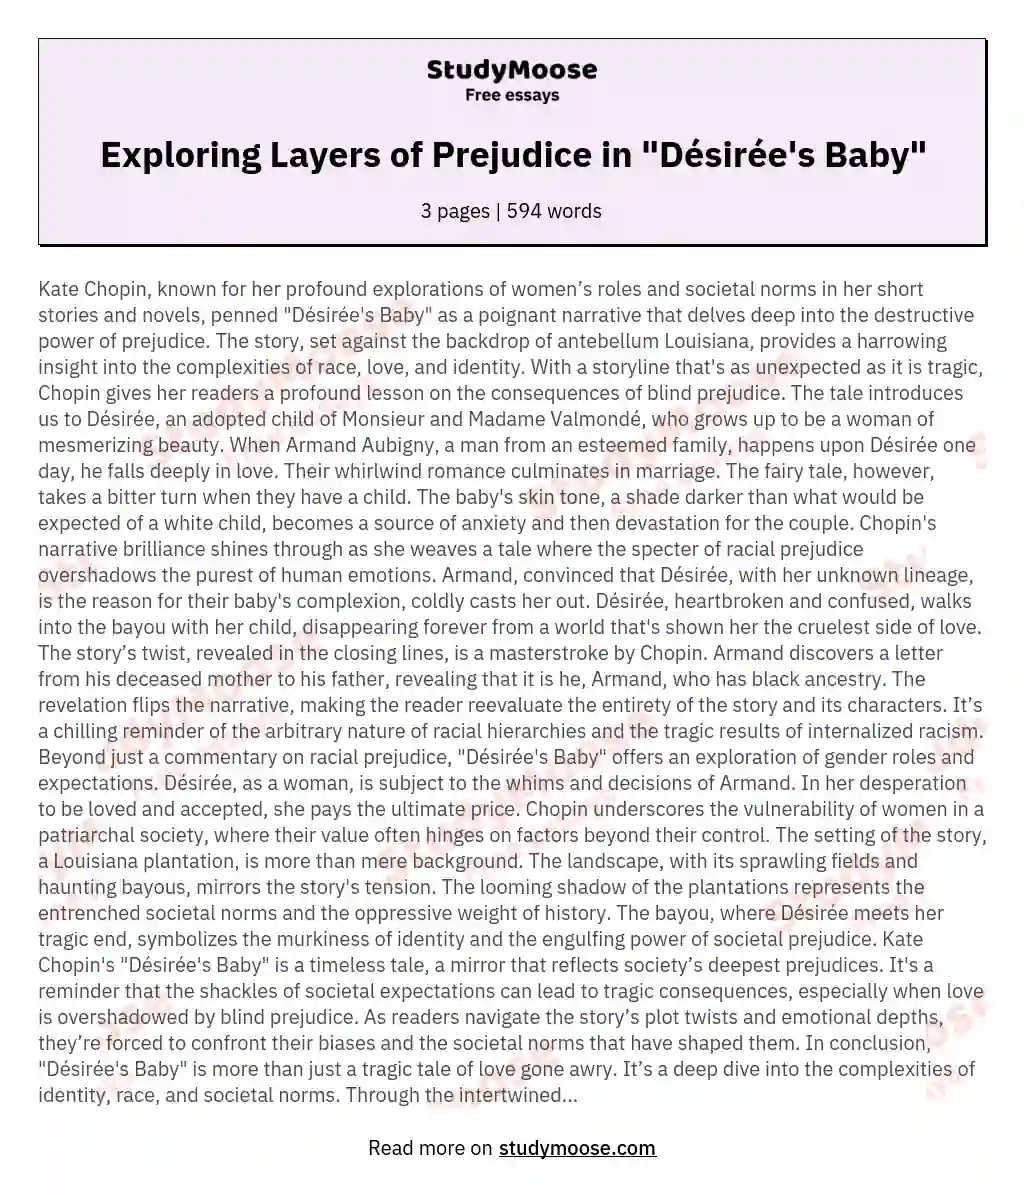 Exploring Layers of Prejudice in "Désirée's Baby" essay